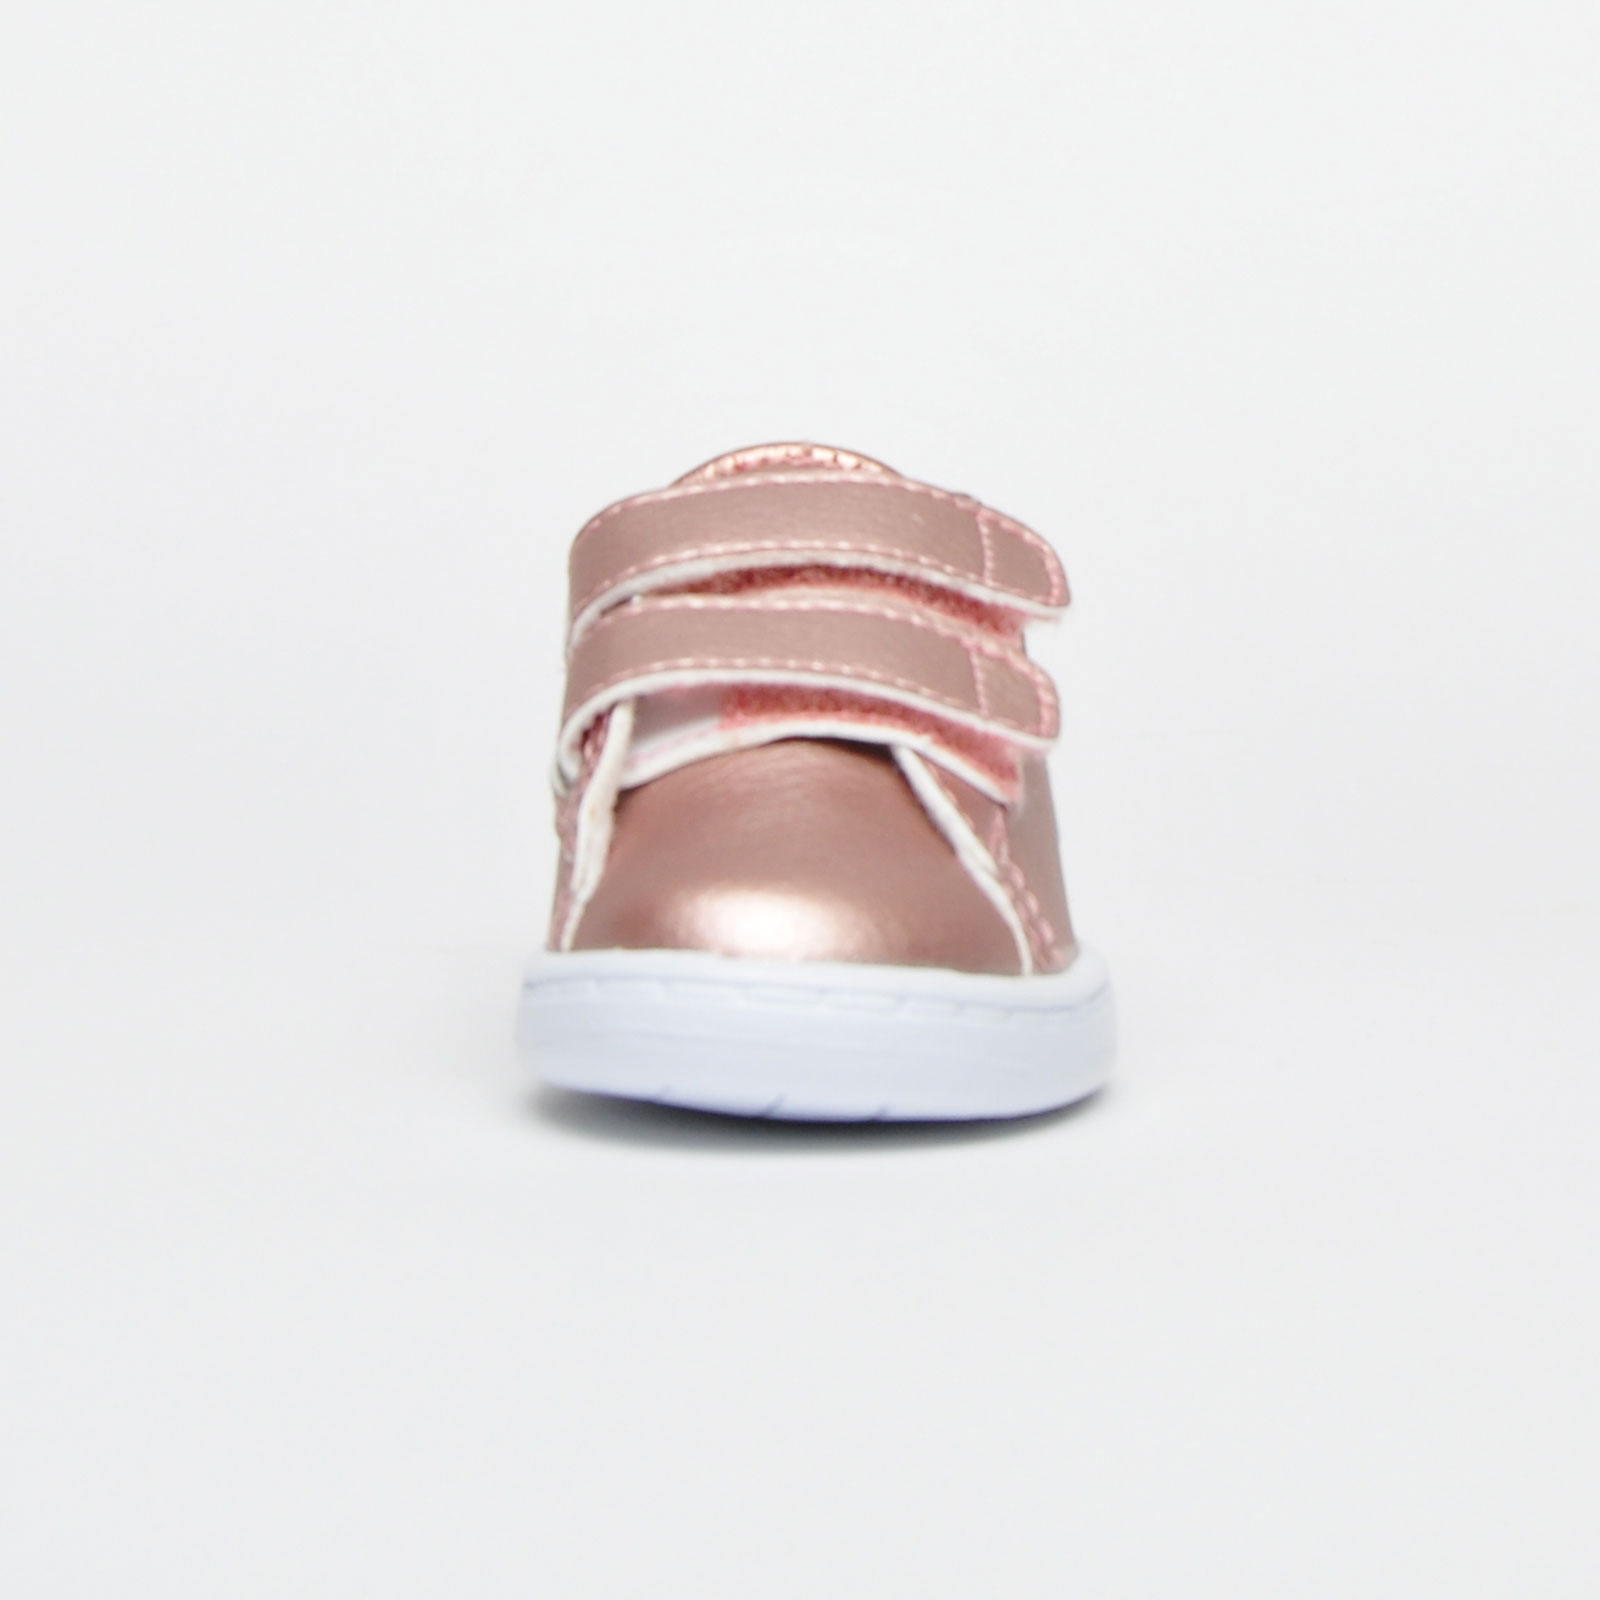 toddlers designer trainers